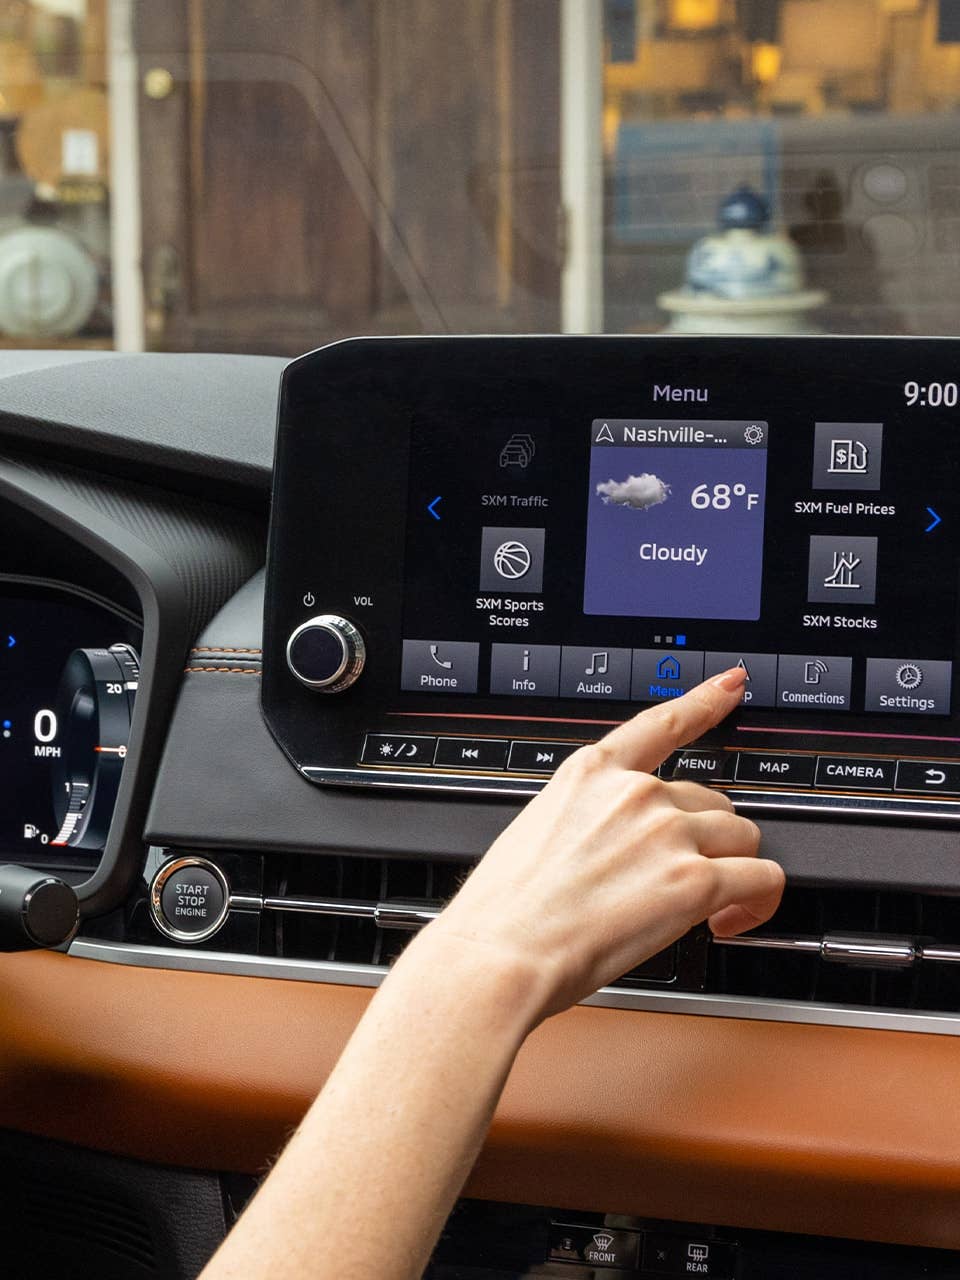 Eyes on the Road: 7 Android Auto Tips Every Driver Needs